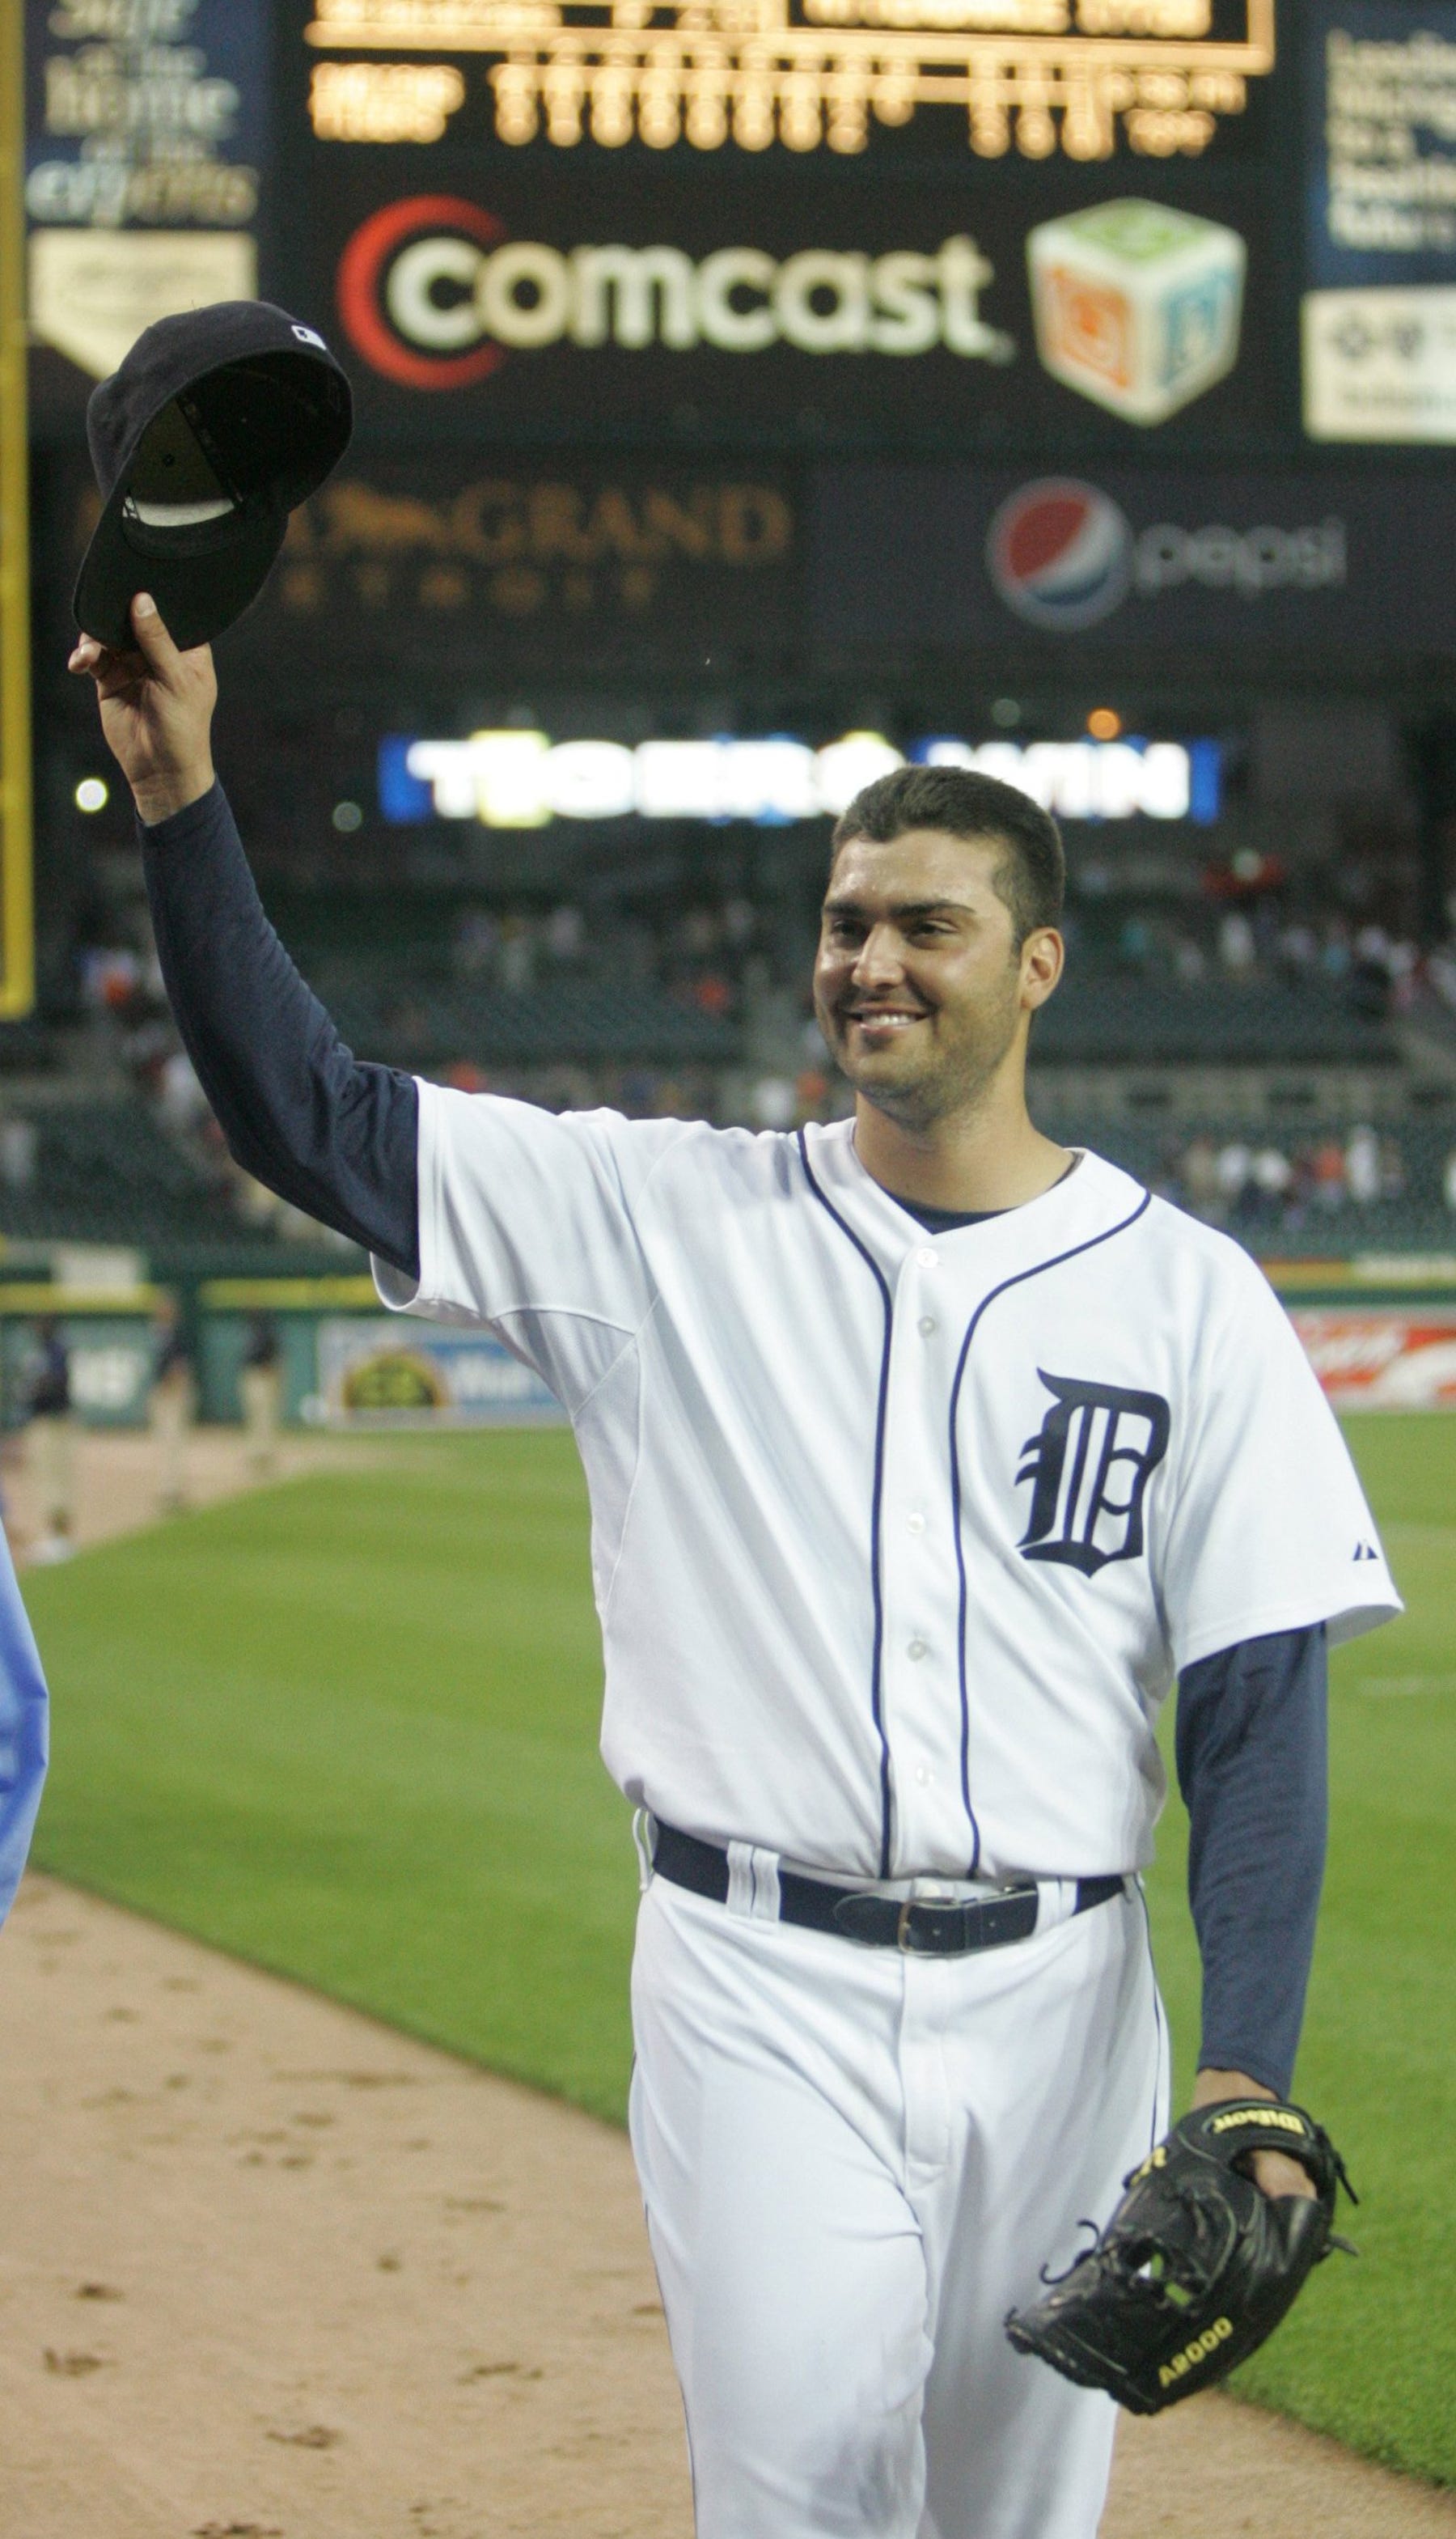 Detroit Tigers' Armando Galarraga waves to fans after pitching a near perfect game against the Cleveland Indians, Wednesday, June 2, 2010 at Comerica Park.